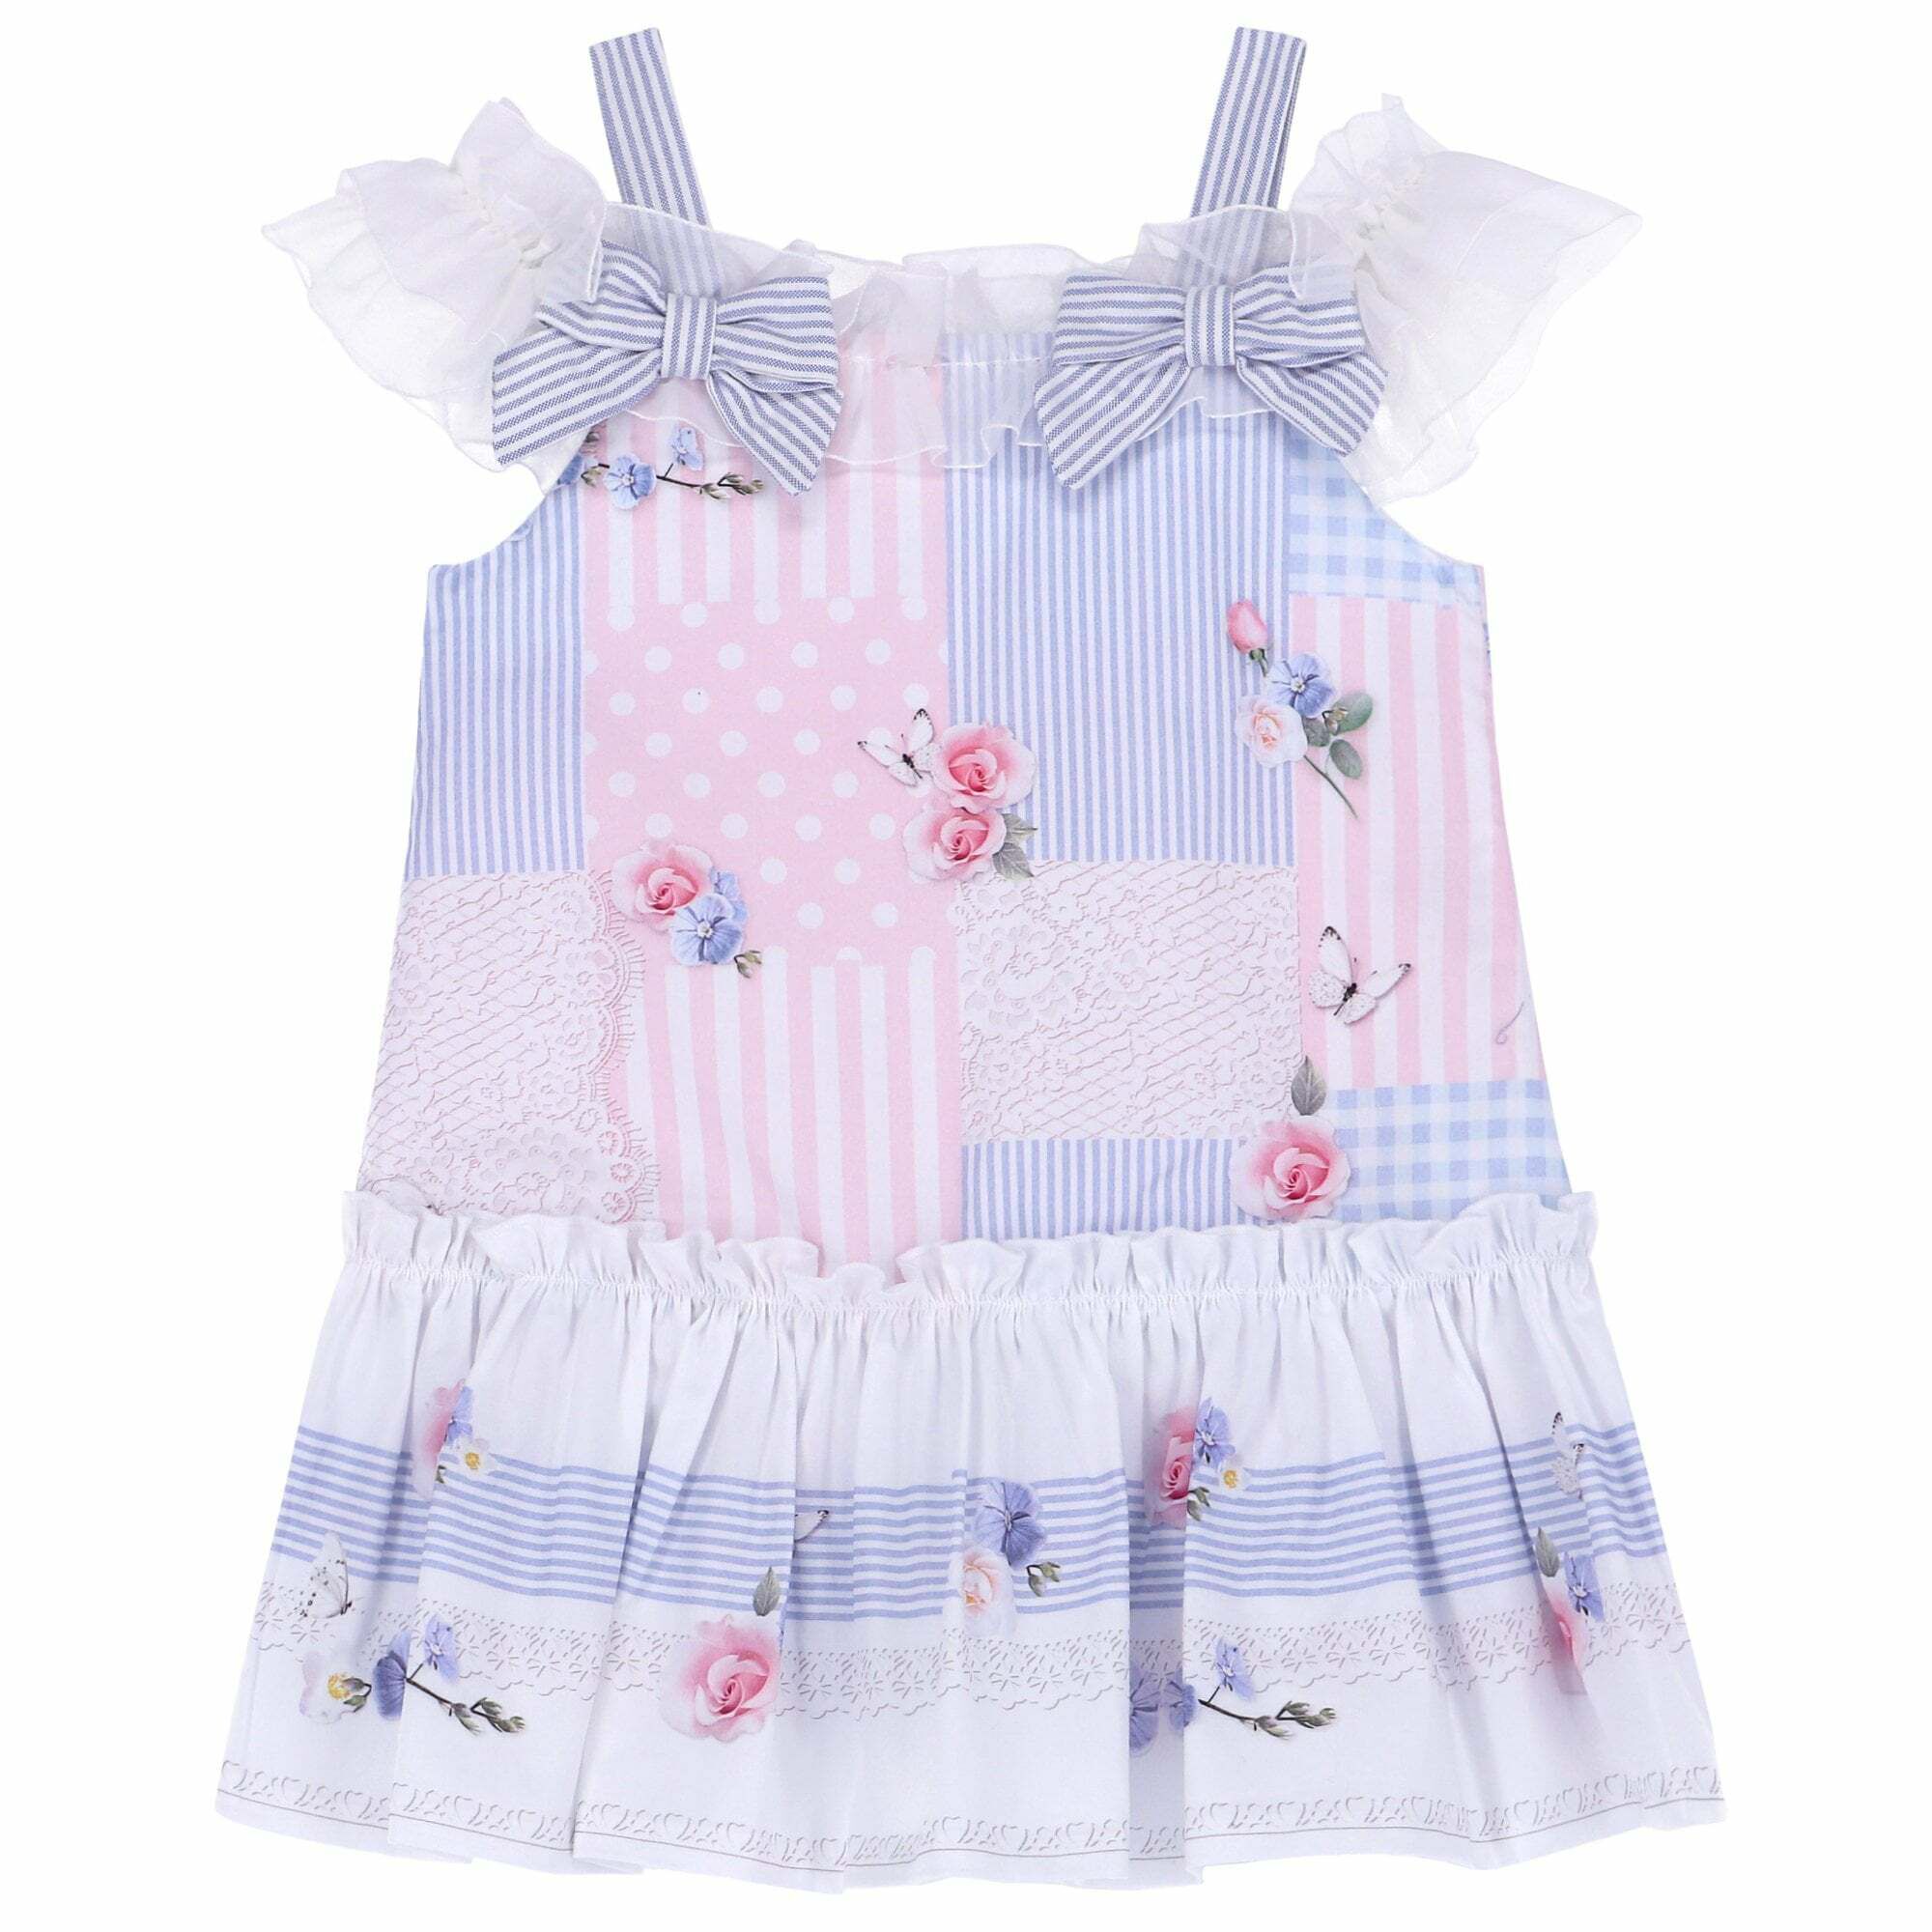 Pretty Pale Pink and Blue House dress